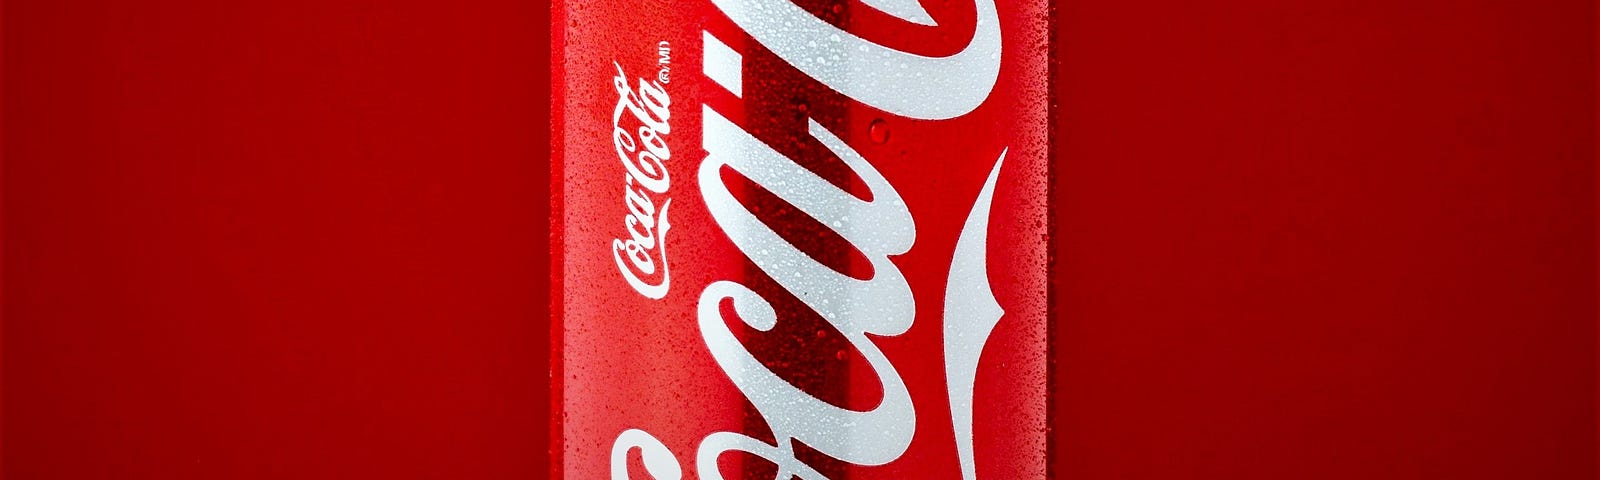 Coca Cola is one of the words most valuable brands